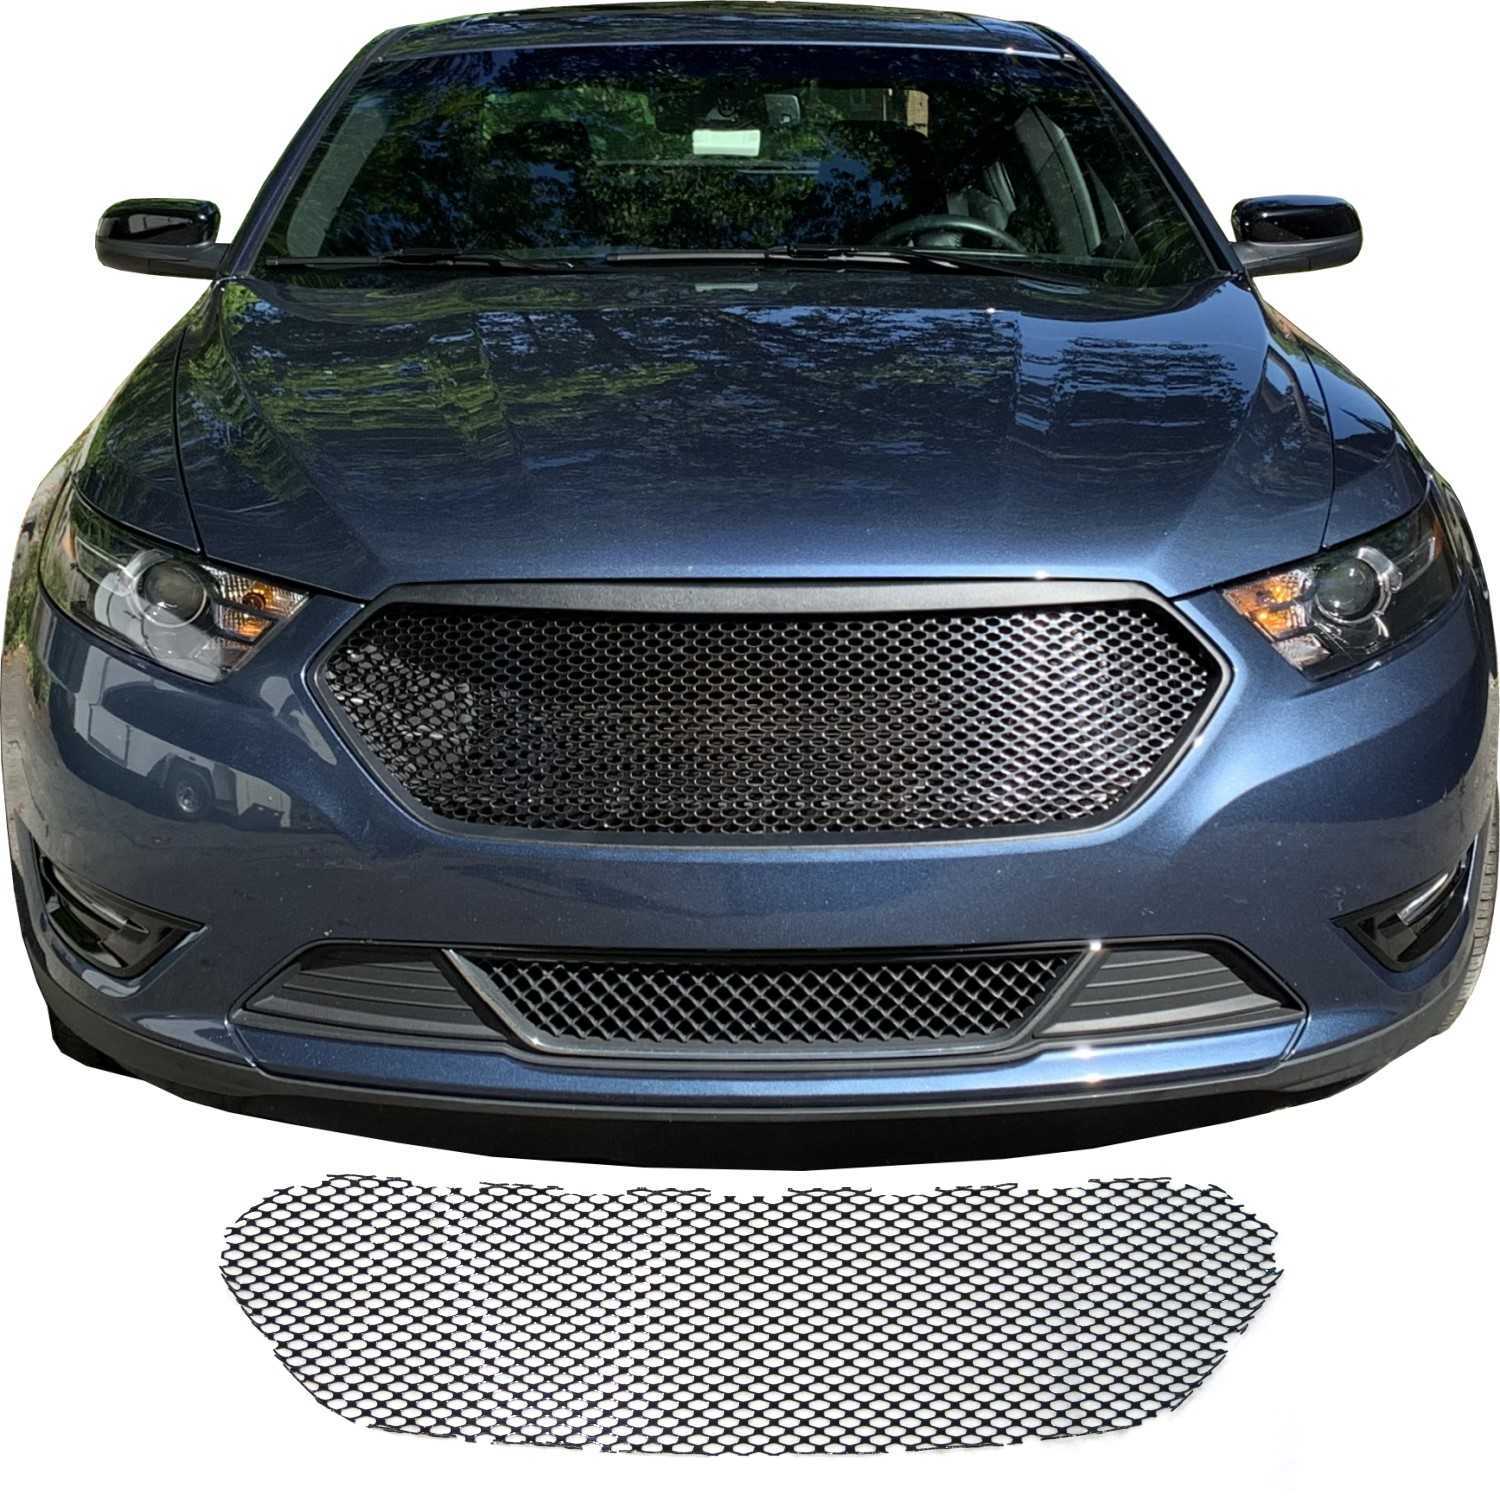 BLACK GRILL MESH PIECE FOR A 2013-2019 FORD TAURUS - GRILLE FRAME NOT  INCLUDED!